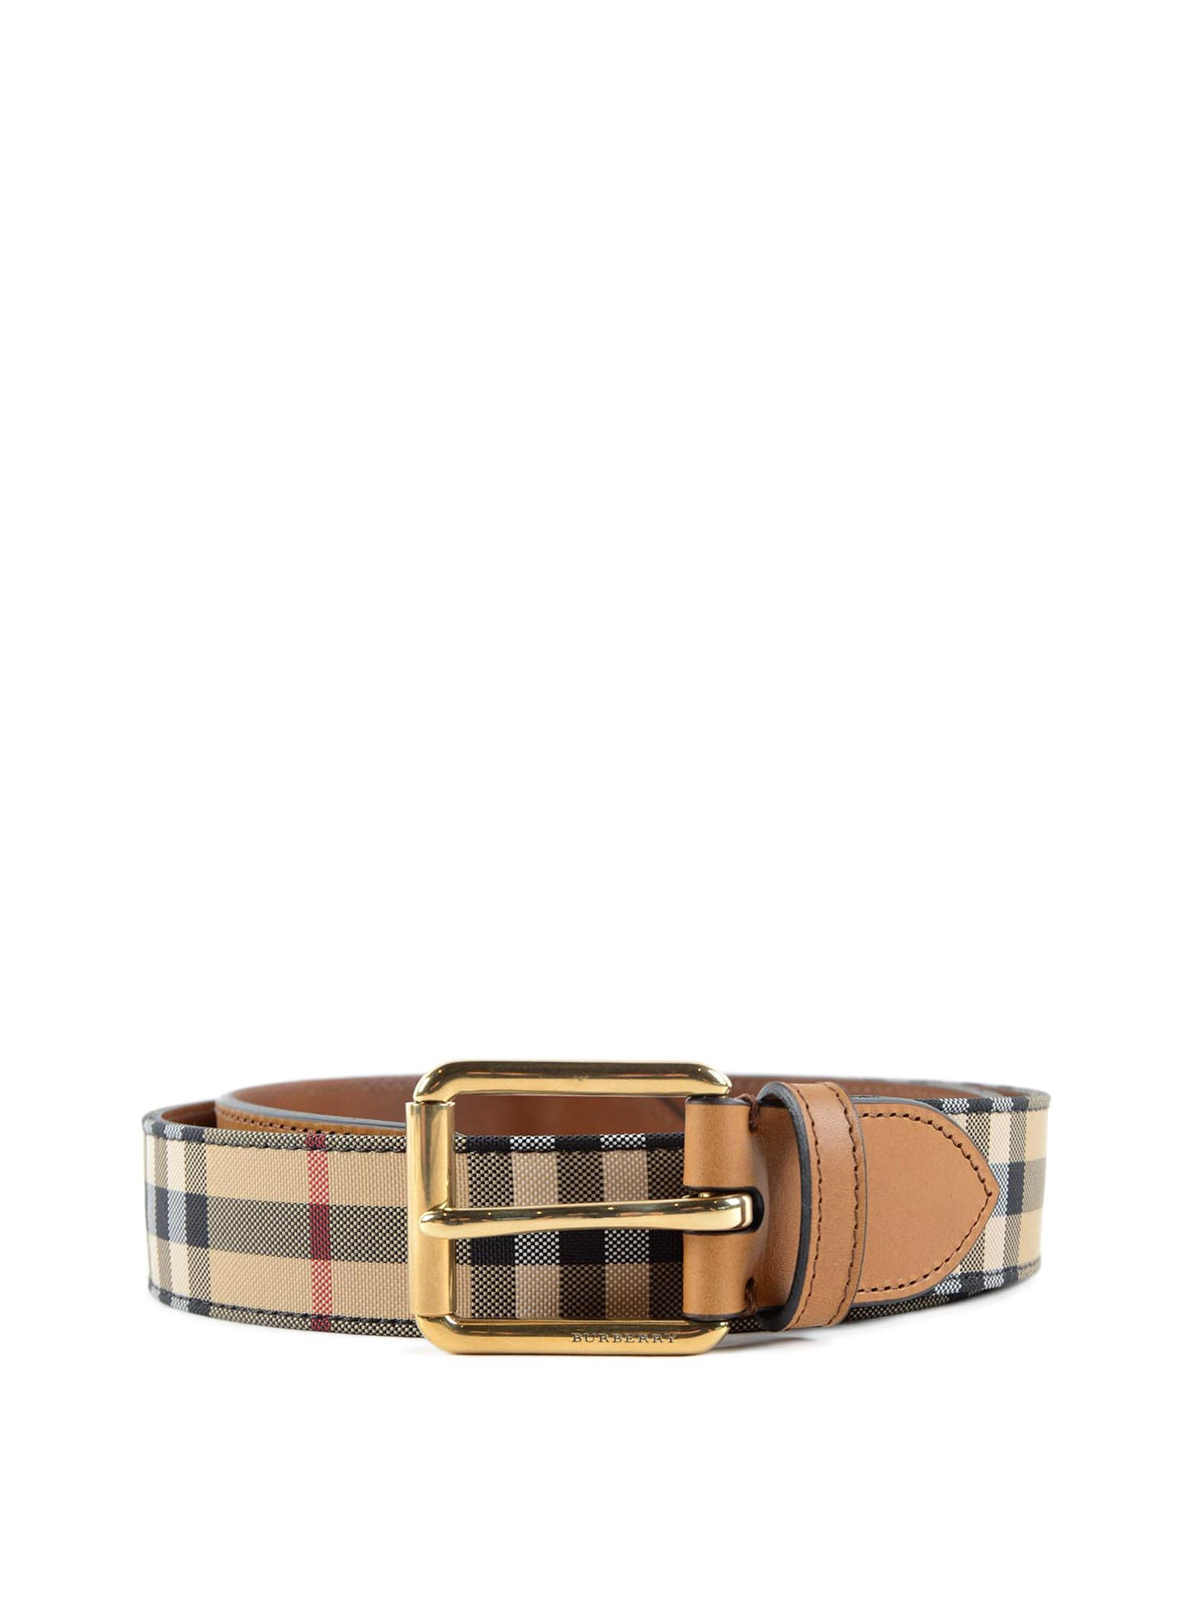 Burberry - Mark canvas and leather belt - belts - 3976355